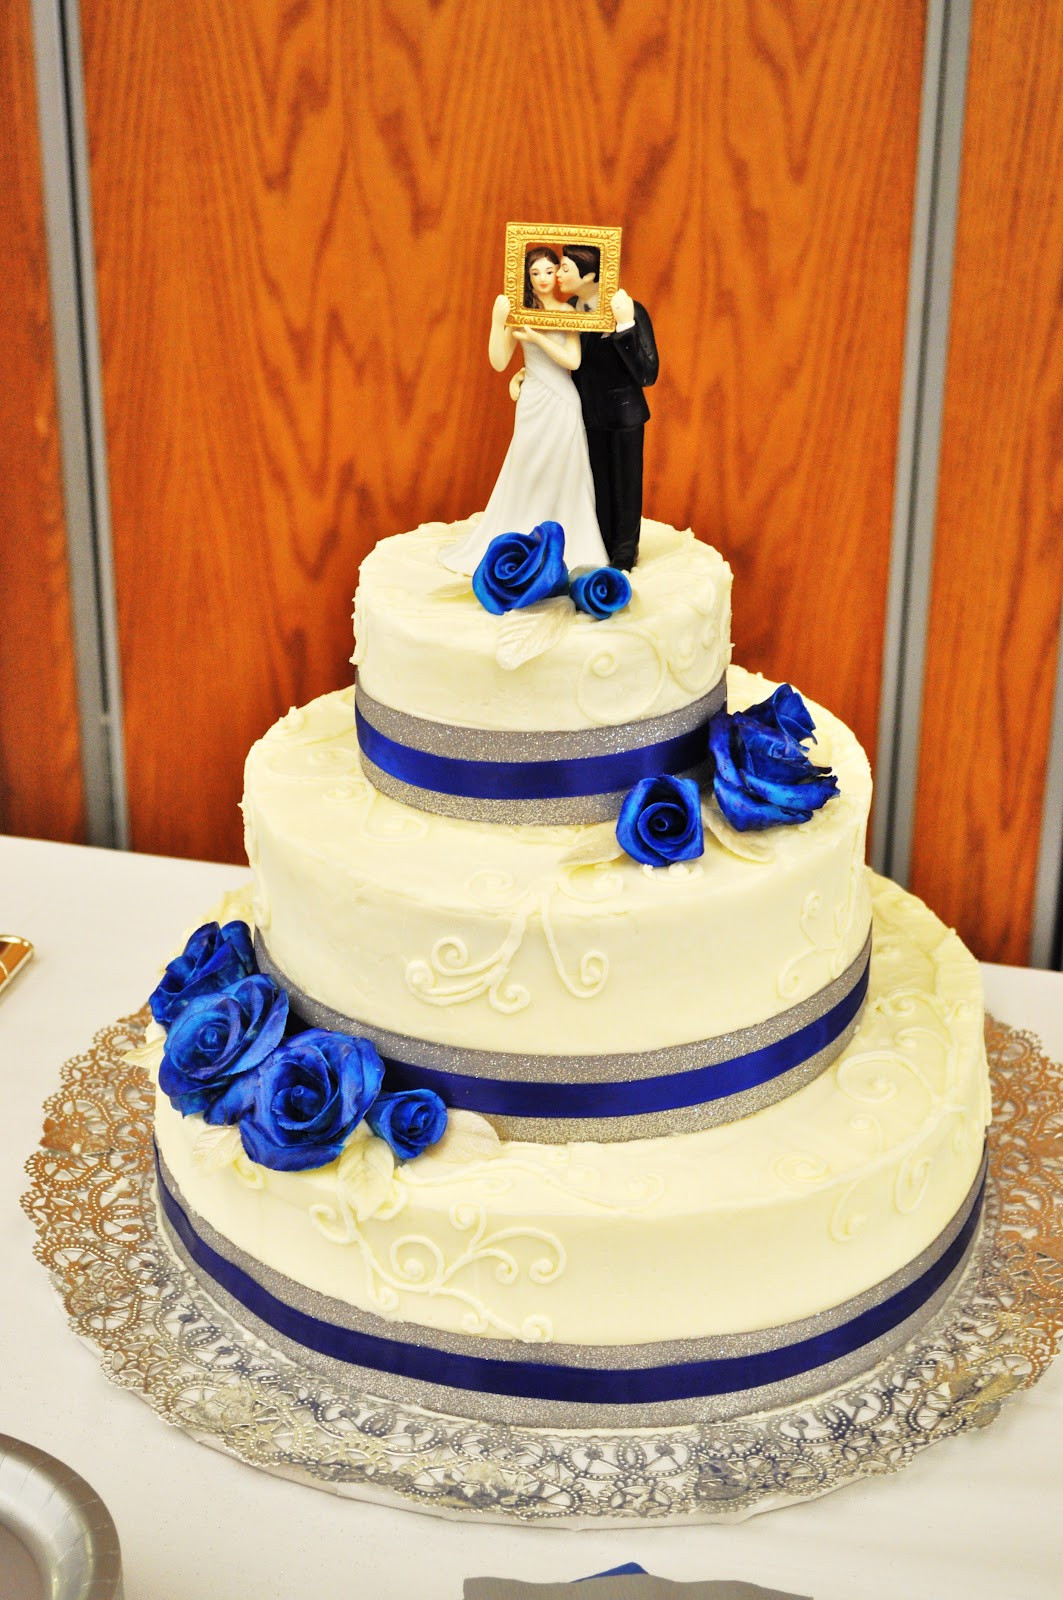 Royal Blue And Silver Wedding Cakes
 CakeJoy Royal Blue and Silver Wedding